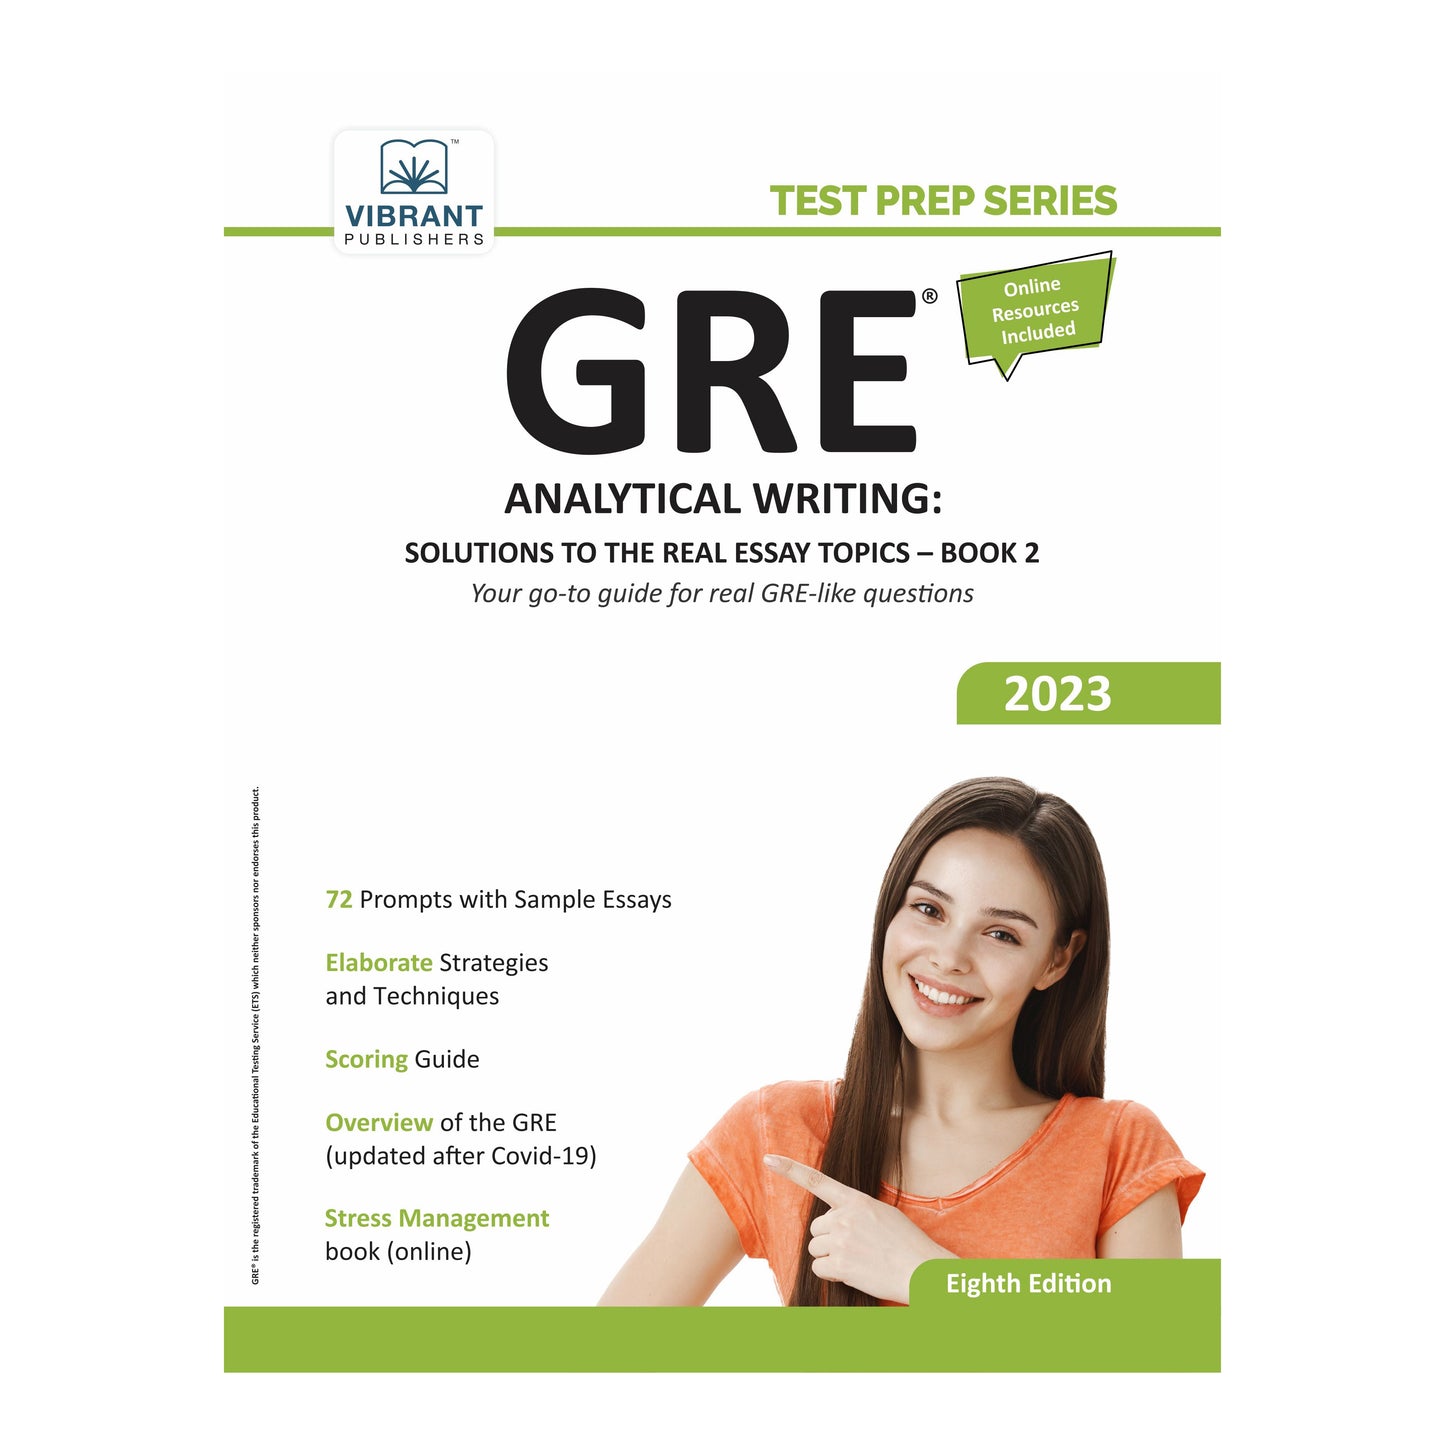 GRE Analytical Writing: Solutions to the Real Essay Topics - Book 2 (2023 Edition)